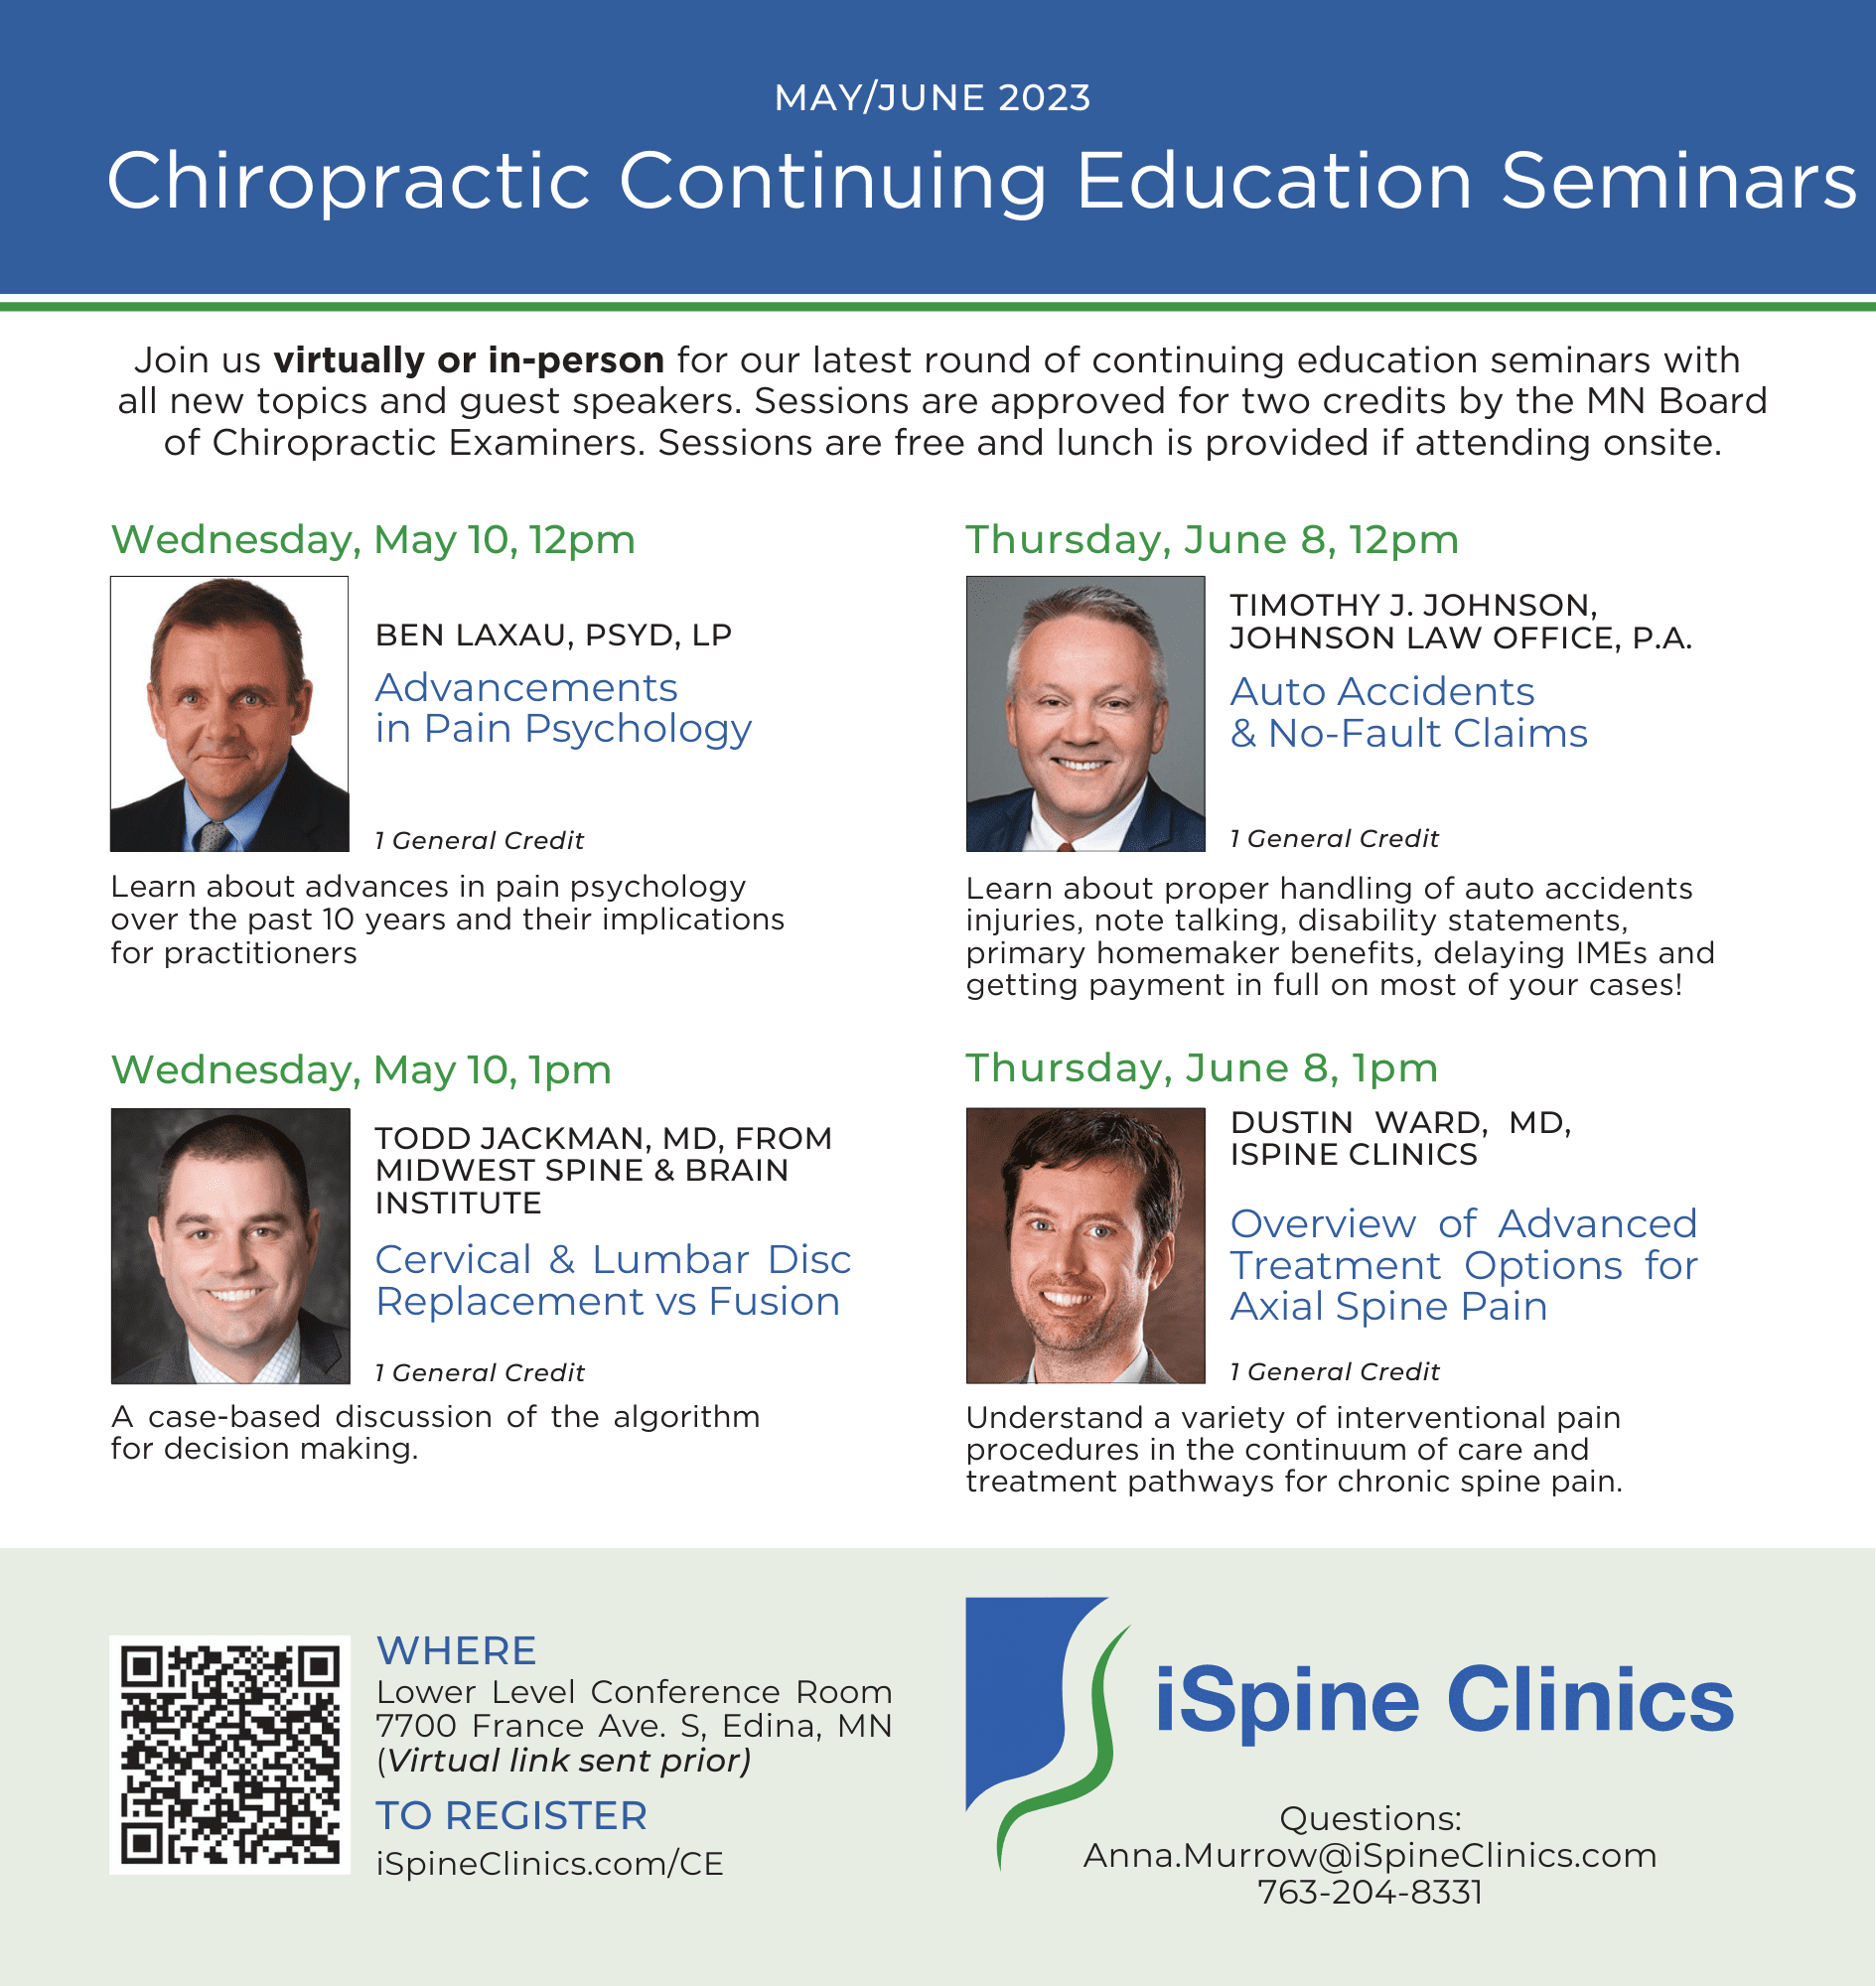 iSpine Clinics Chiropractic Seminar May and June 2023